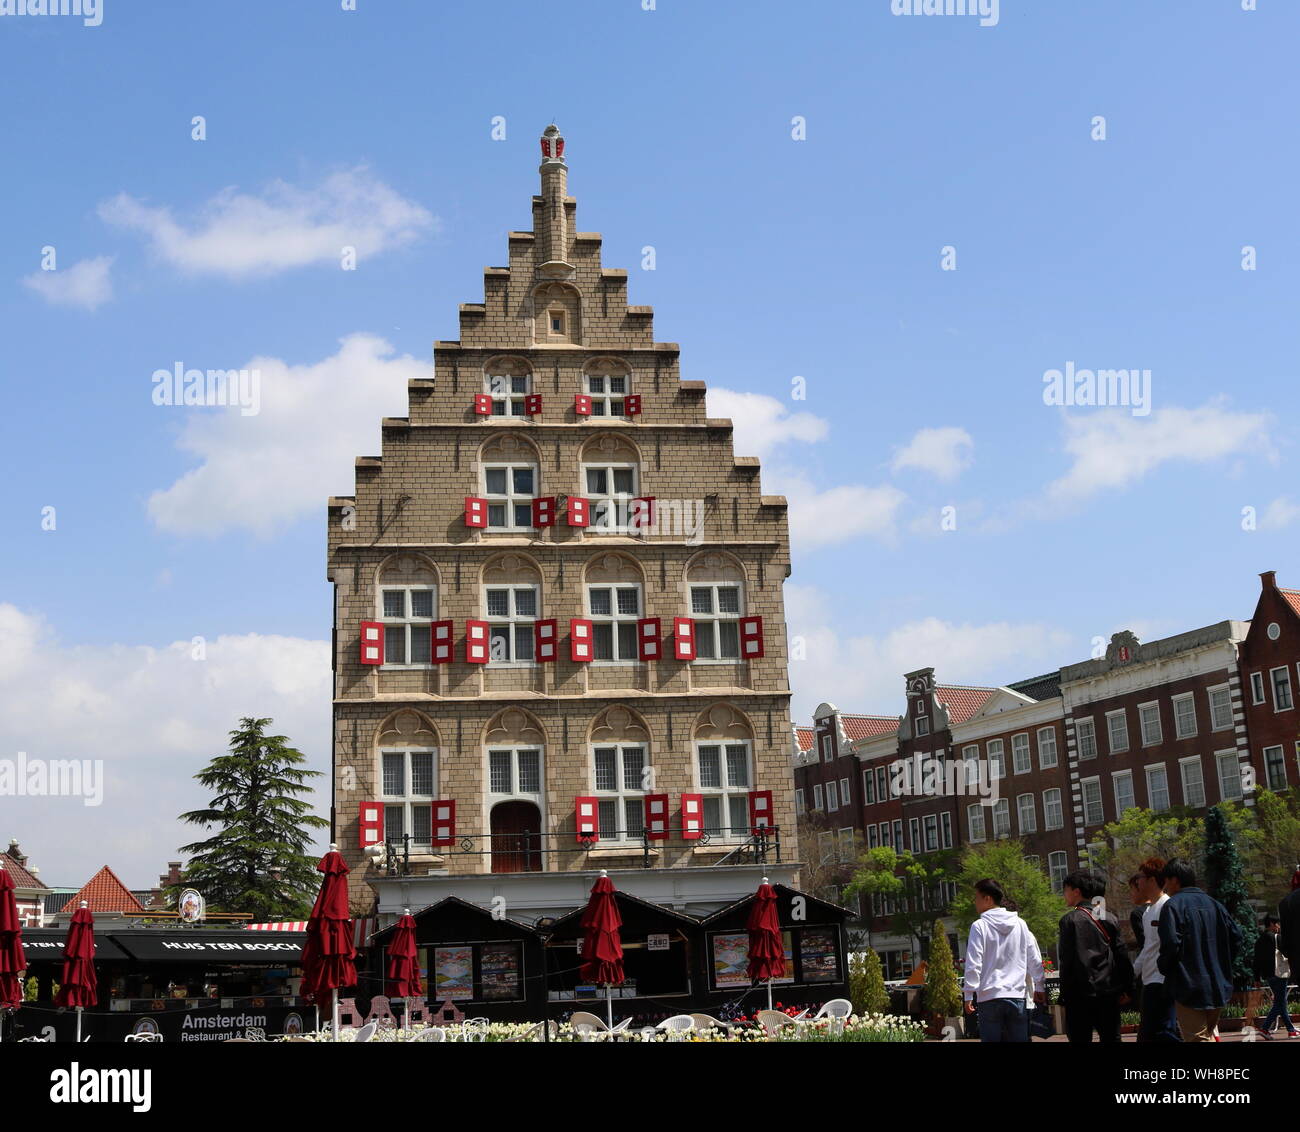 Replicated Gouda old city hall in Huis Ten Bosch, which is the largest theme park located in Nagasaki, Japan. It is known as little Europe because the Stock Photo